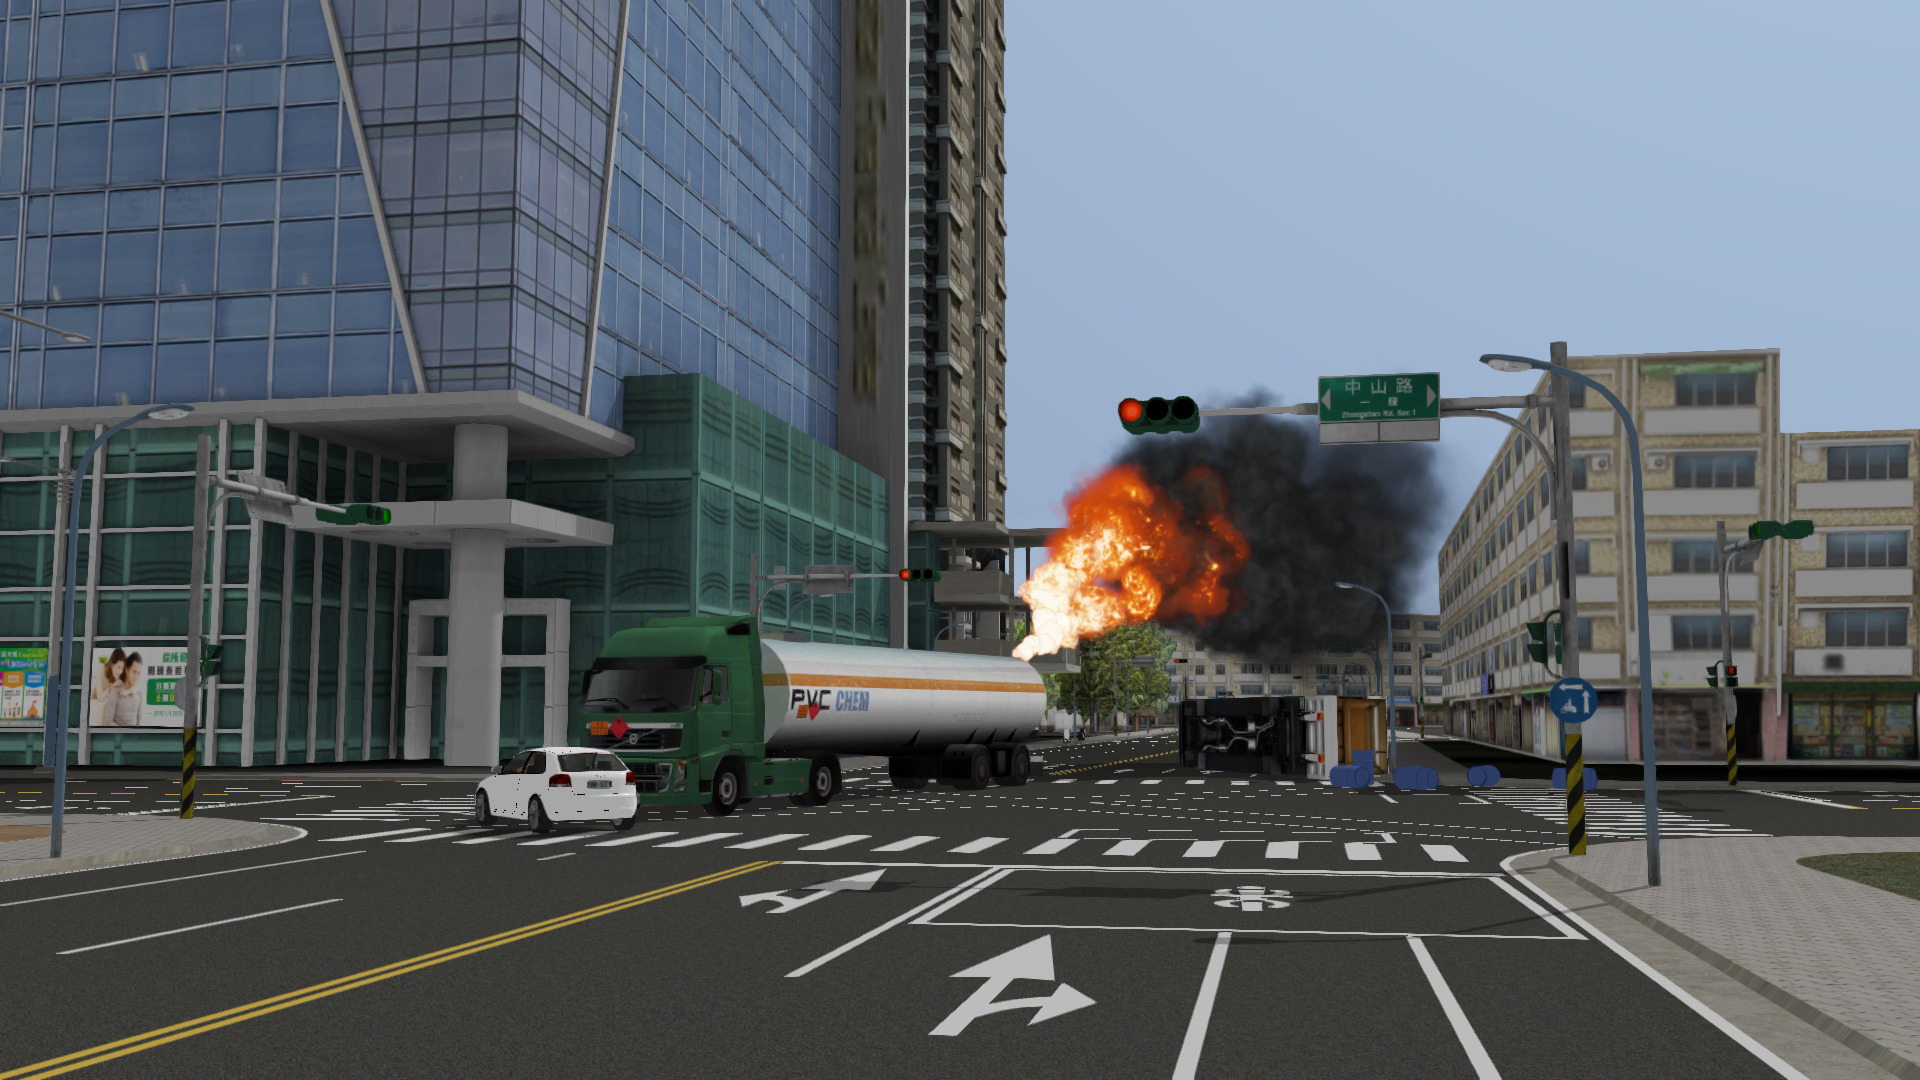 Accident on a crossing with a tanker truck on fire, a car with casualties, and spilled chemicals built by instructors.